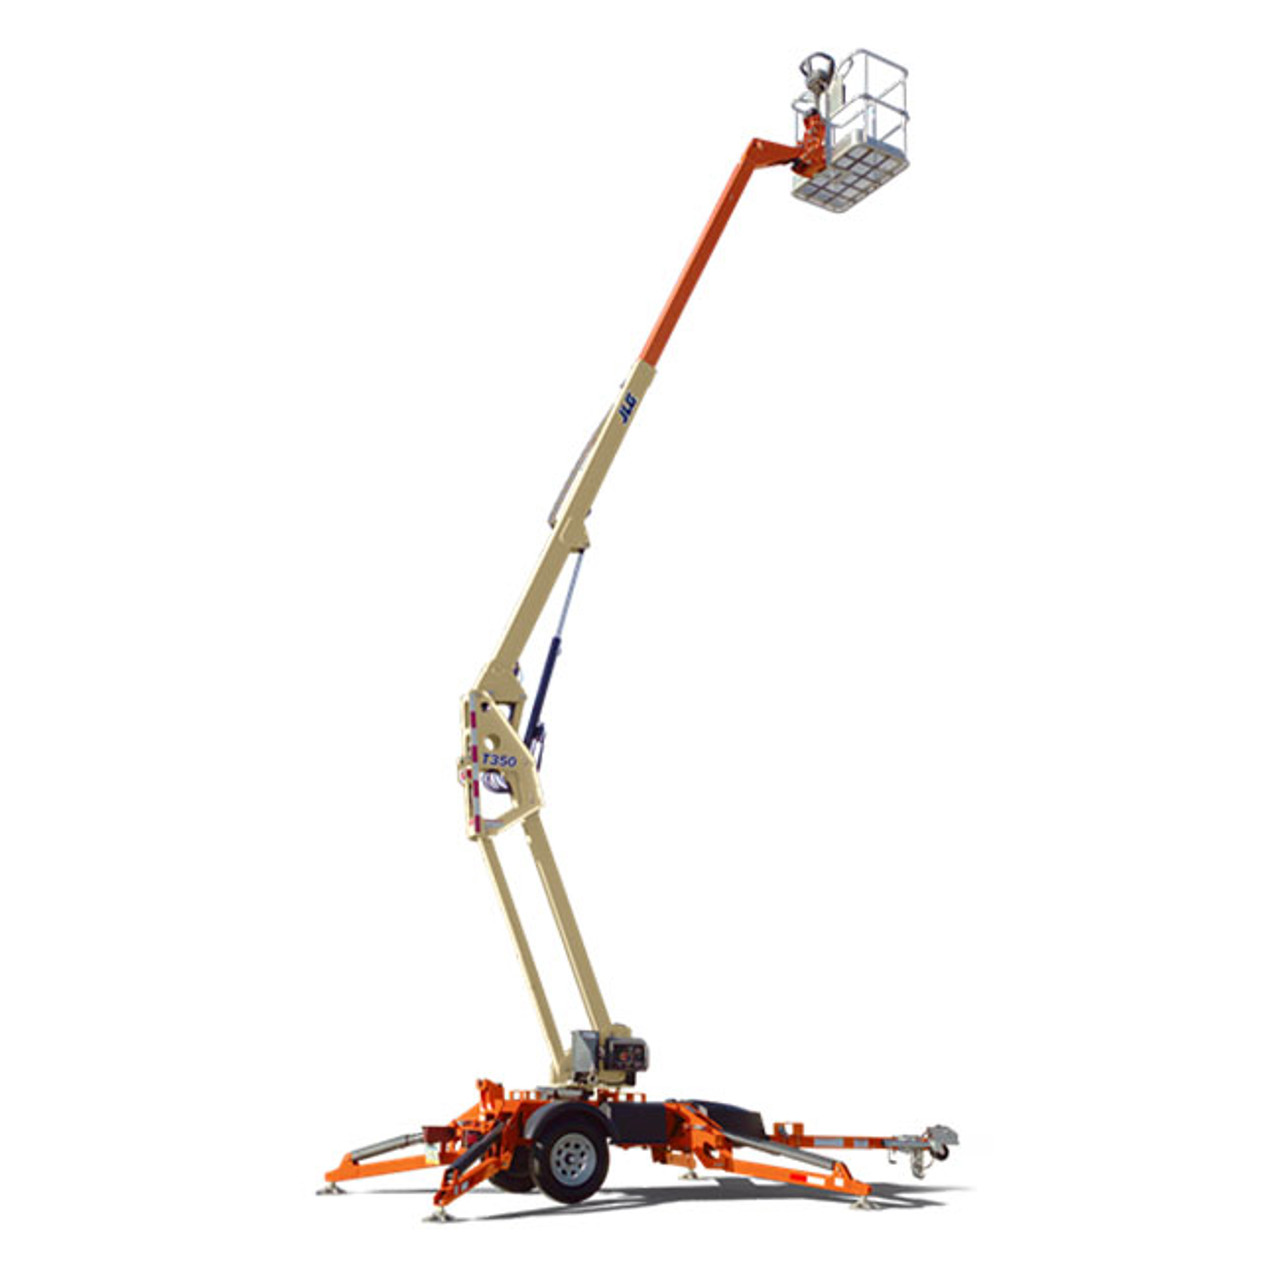 JLG T350 TowPro® Boom Lift 35' towable, electric Holmes Rental Station